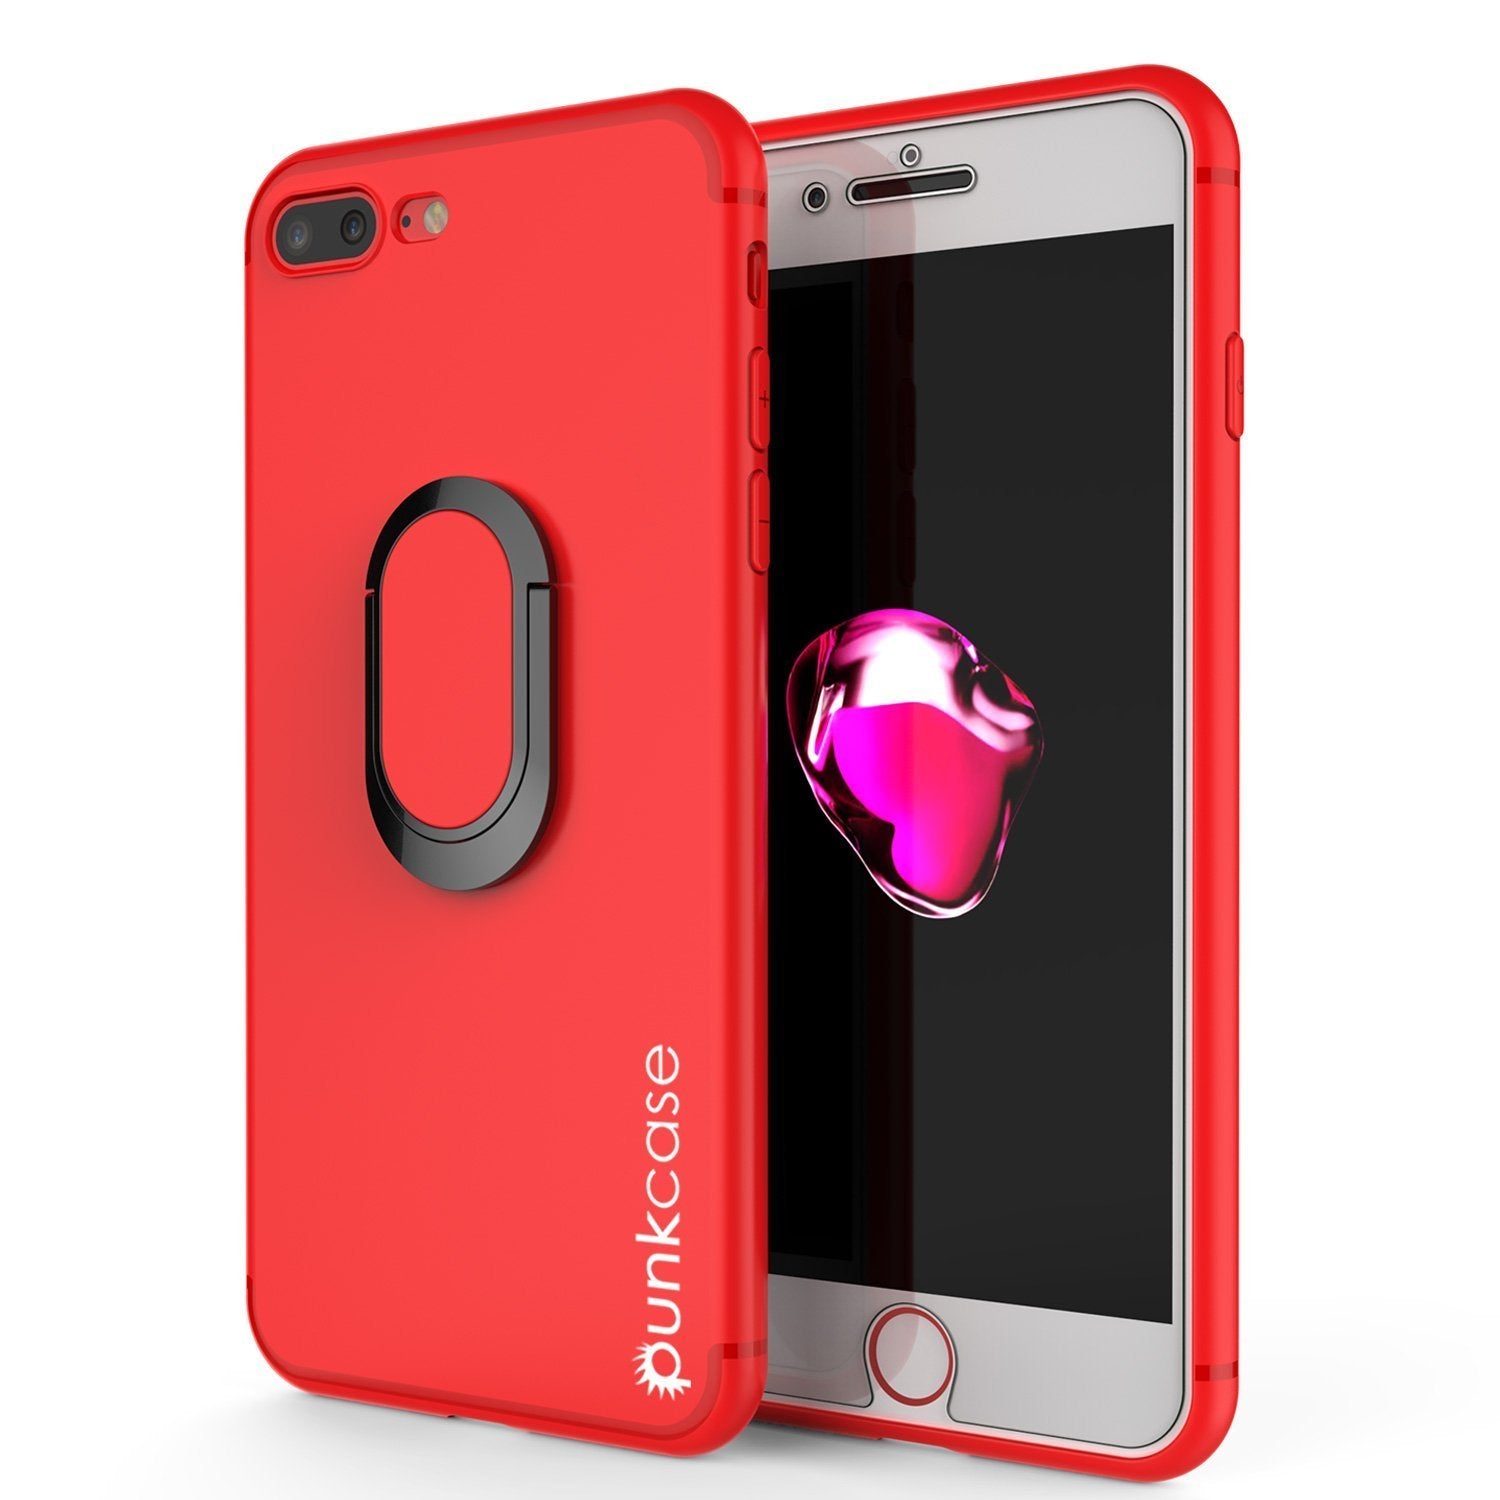 iPhone 8 Plus Case, Punkcase Magnetix Protective TPU Cover W/ Kickstand, Ring Grip Holder & Metal Plate for Magnetic Car Phone Mount PLUS Tempered Glass Screen Protector for Apple iPhone 7+/8+ [Red]